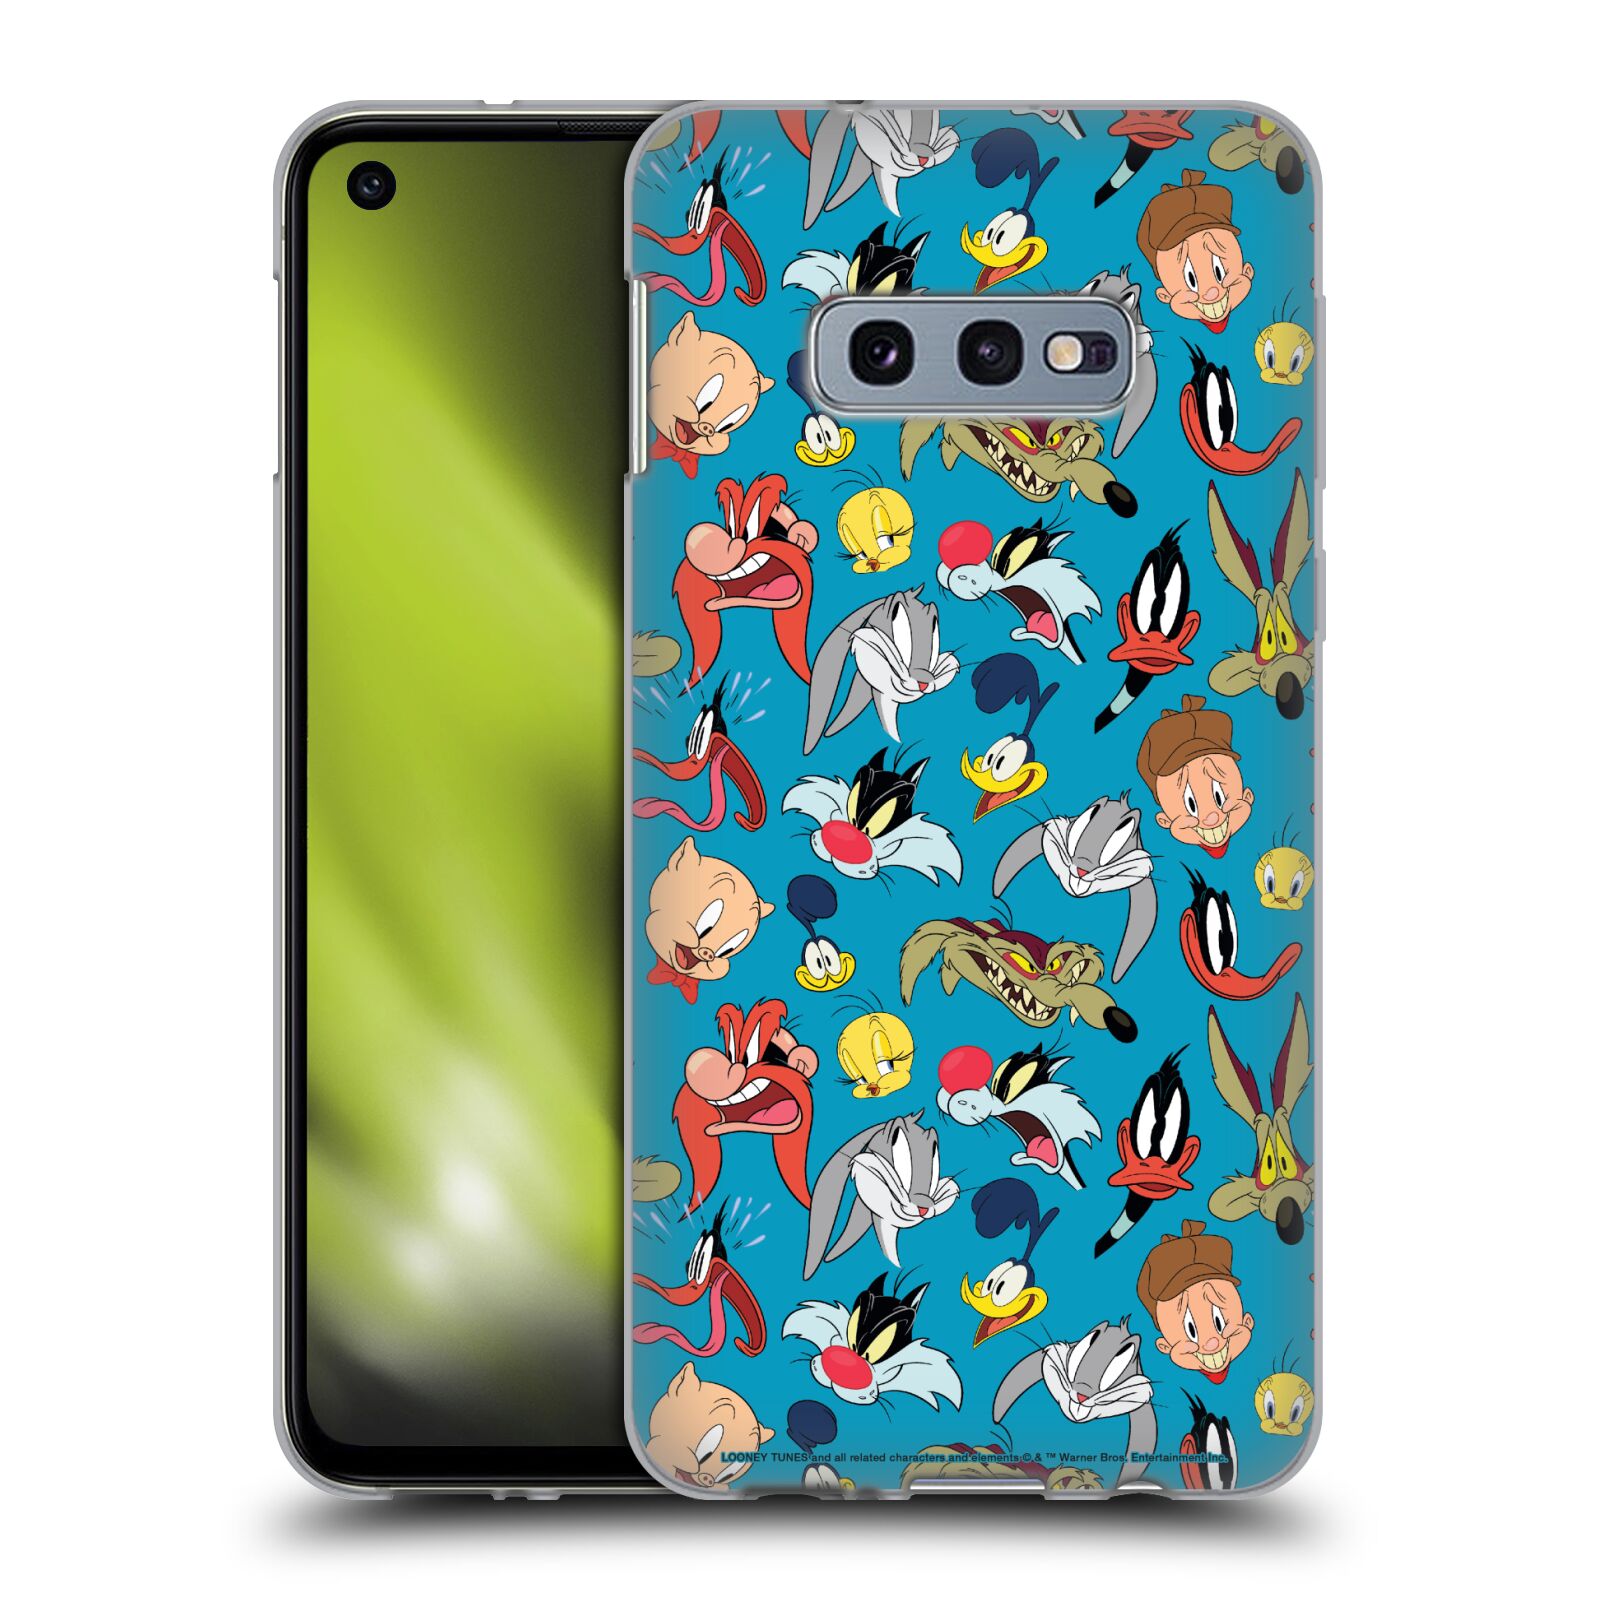 Head Case Designs Officially Licensed Looney Tunes Patterns Head Shots Soft Gel Case Compatible with Samsung Galaxy S10e - image 1 of 7